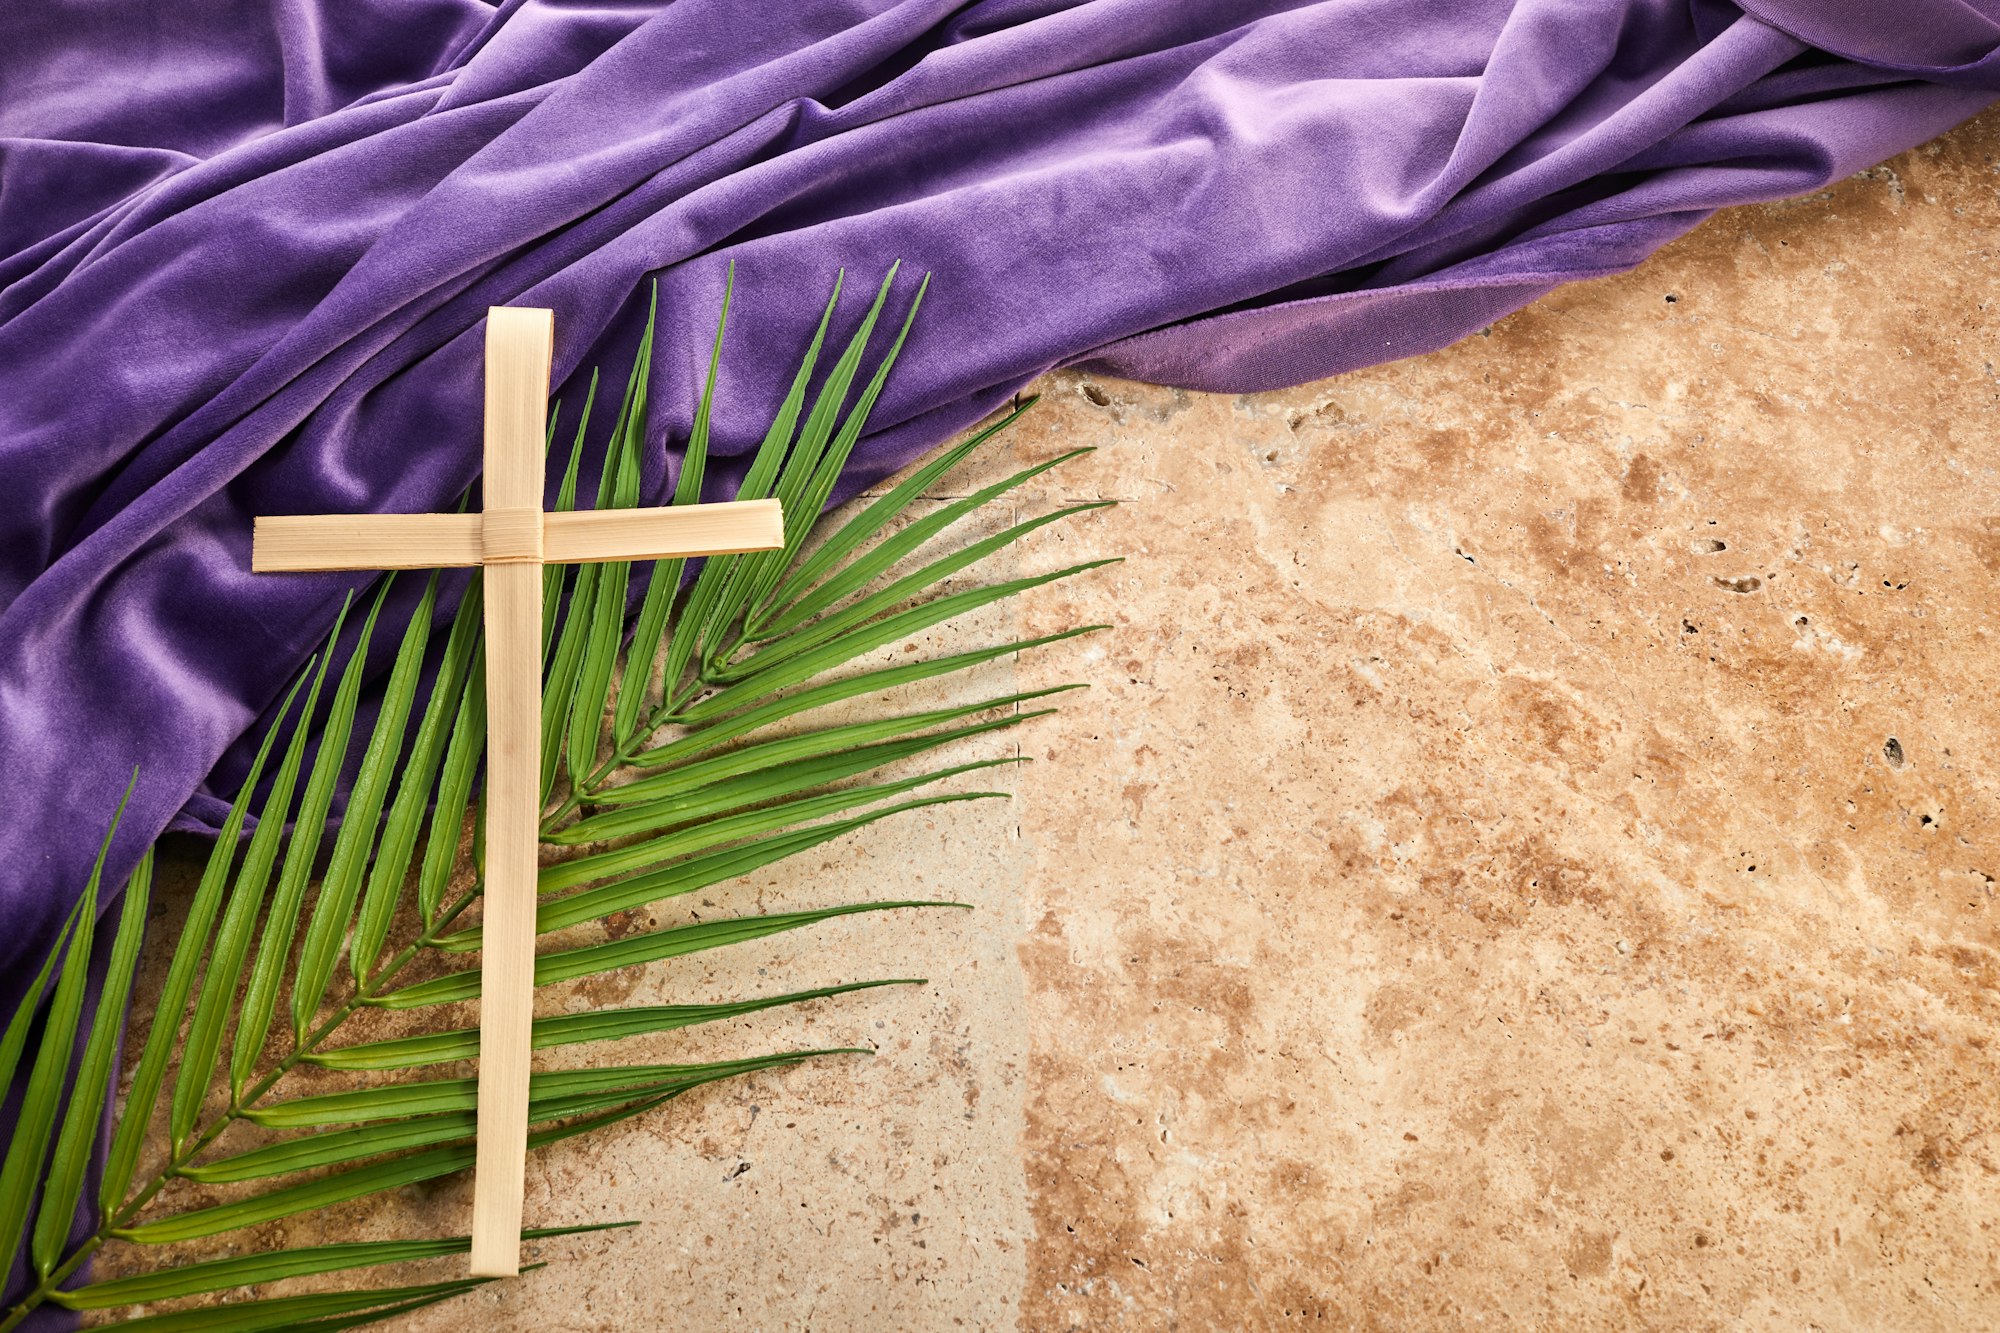 Lent season, Holy week and Good friday concept. Palm leave and cross on stone background